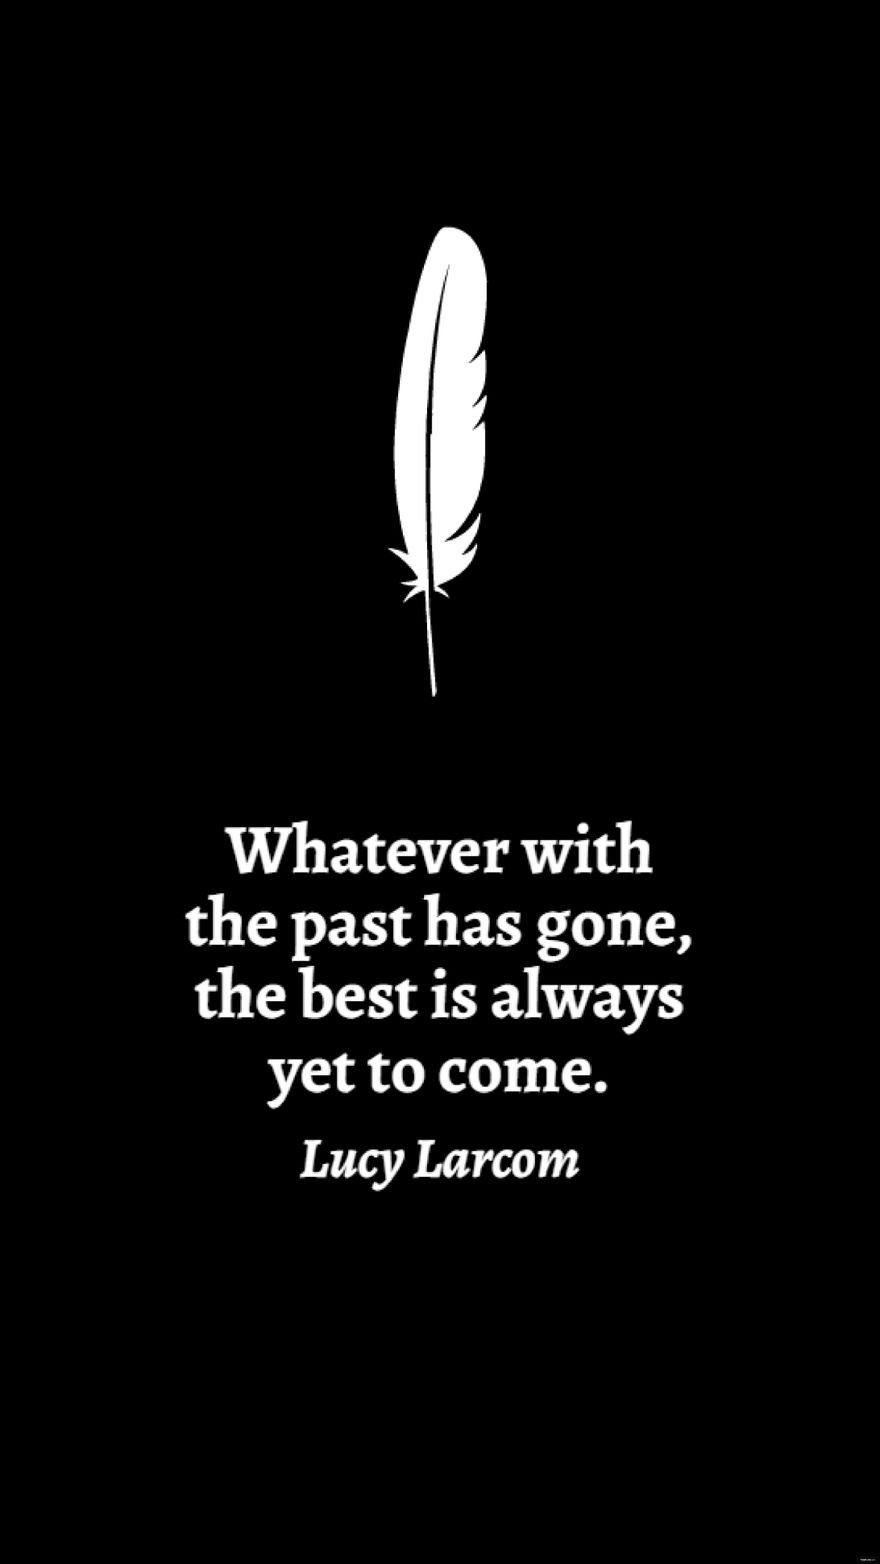 Lucy Larcom - Whatever with the past has gone, the best is always yet to come.